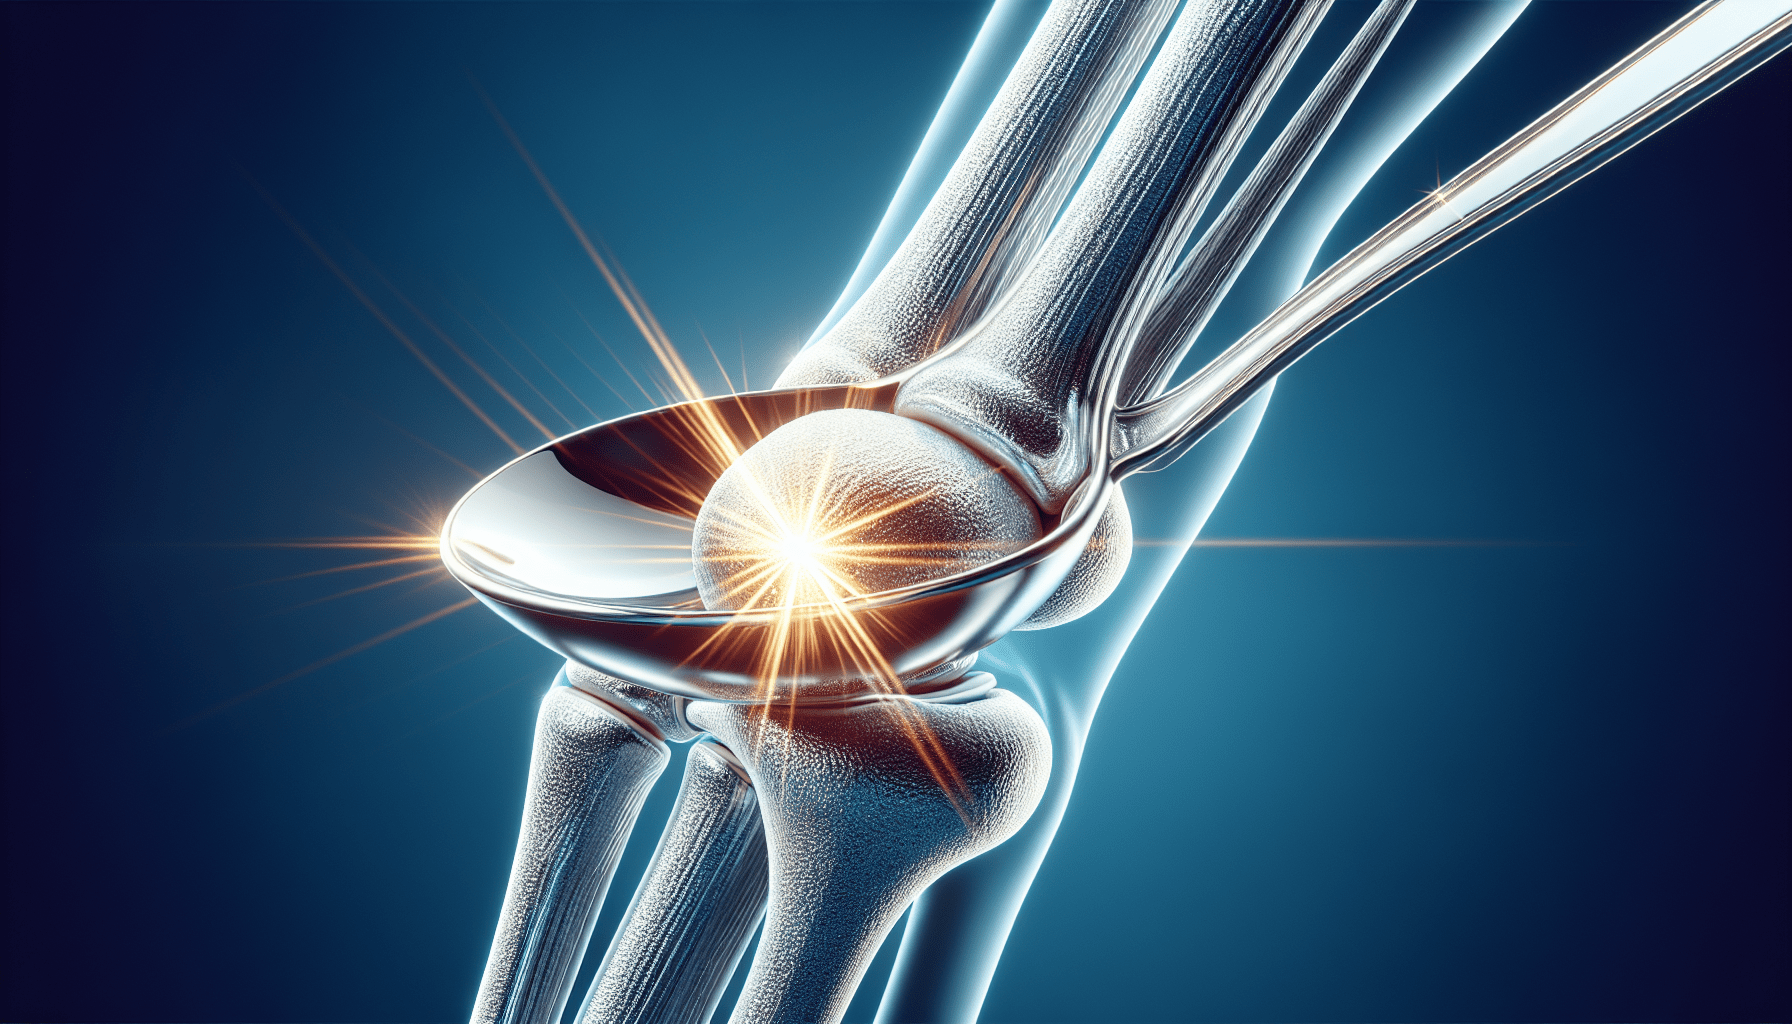 Can Arthritis Be Cleaned Out Of A Joint?